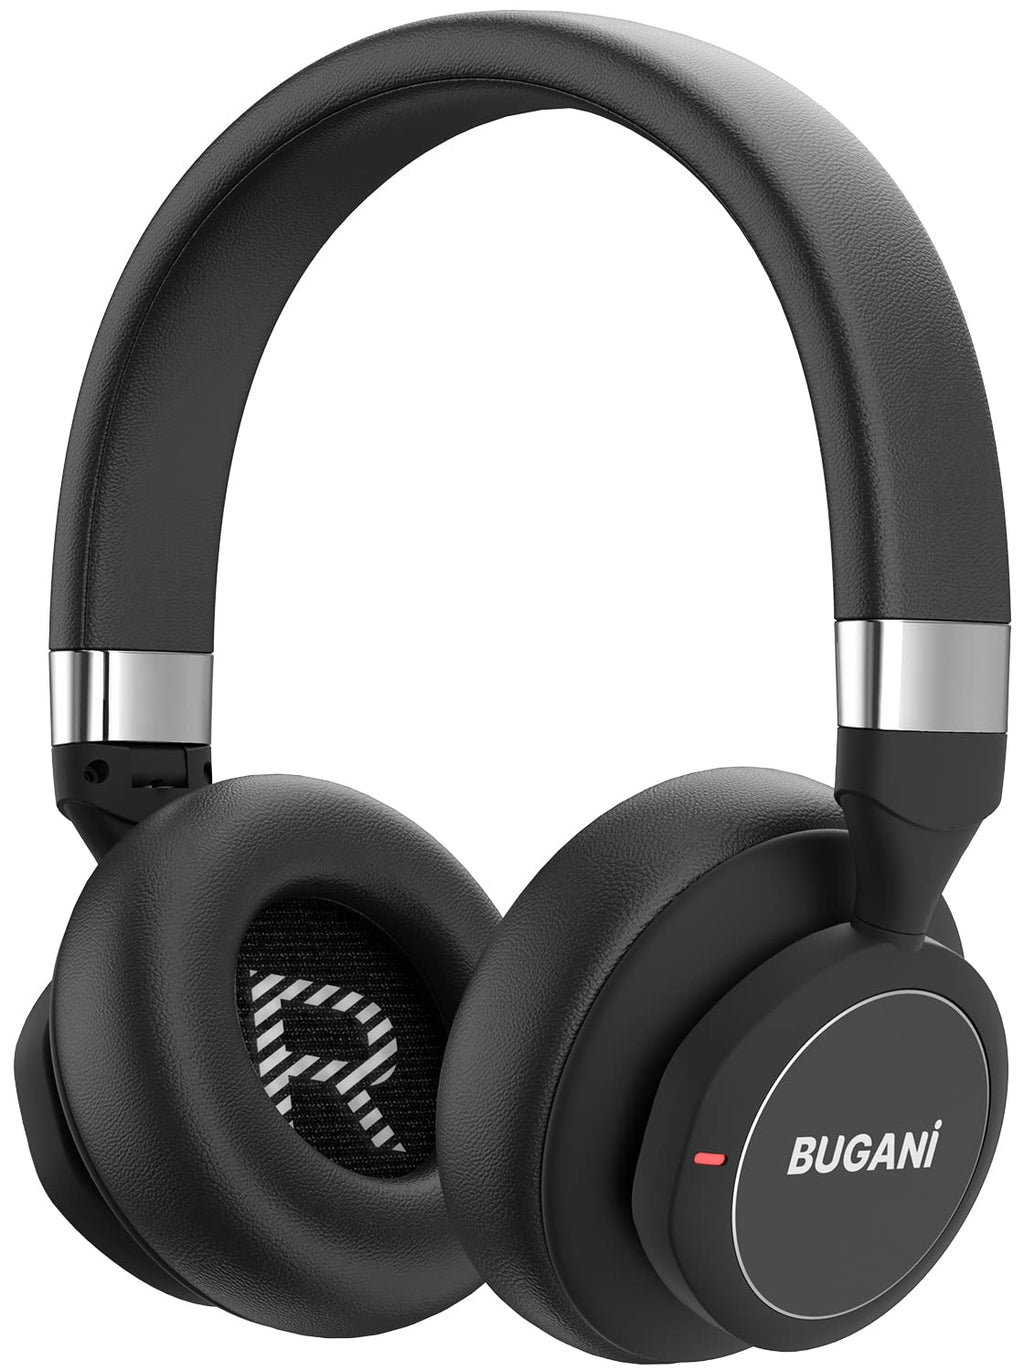  [AUSTRALIA] - BUGANI Active Noise Cancelling Headphones, 30H Playtime Wireless Bluetooth Headset with Deep Bass Hi-Fi Stereo Sound,Comfortable Earpads for Travel/Home/Office